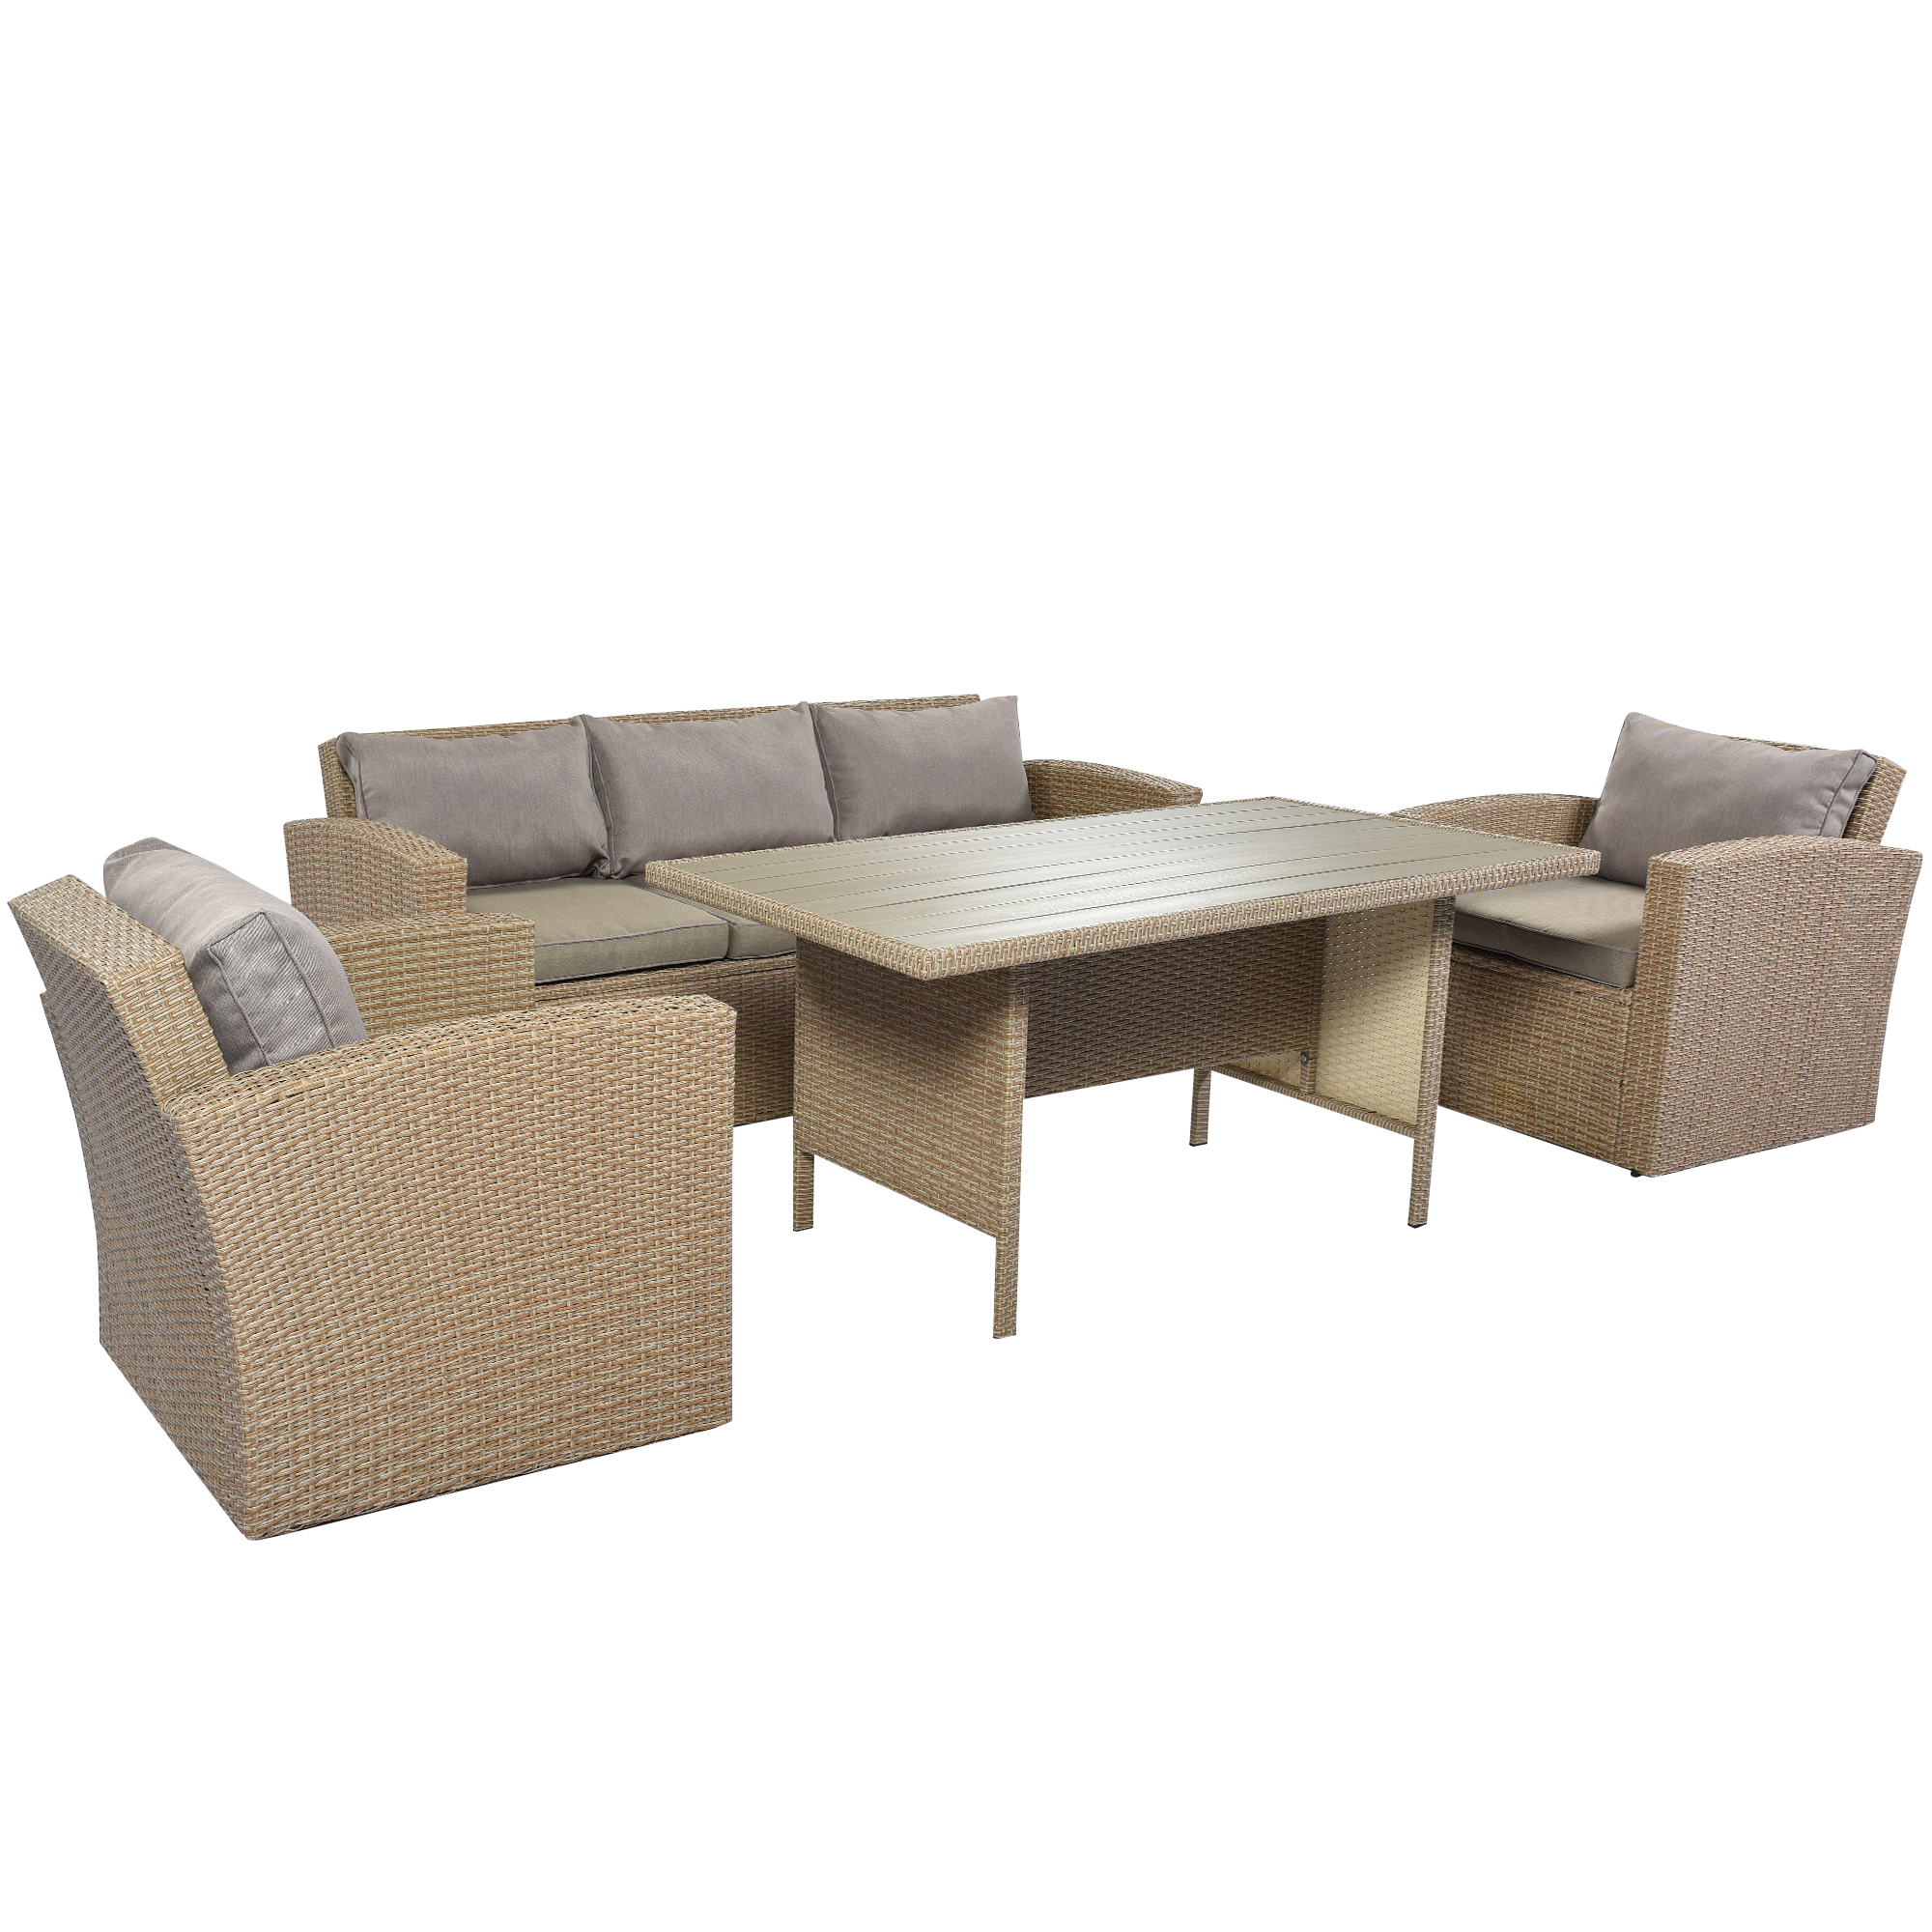 4-Piece Wicker Furniture Sofa Set with Cushions - WY000261AAE